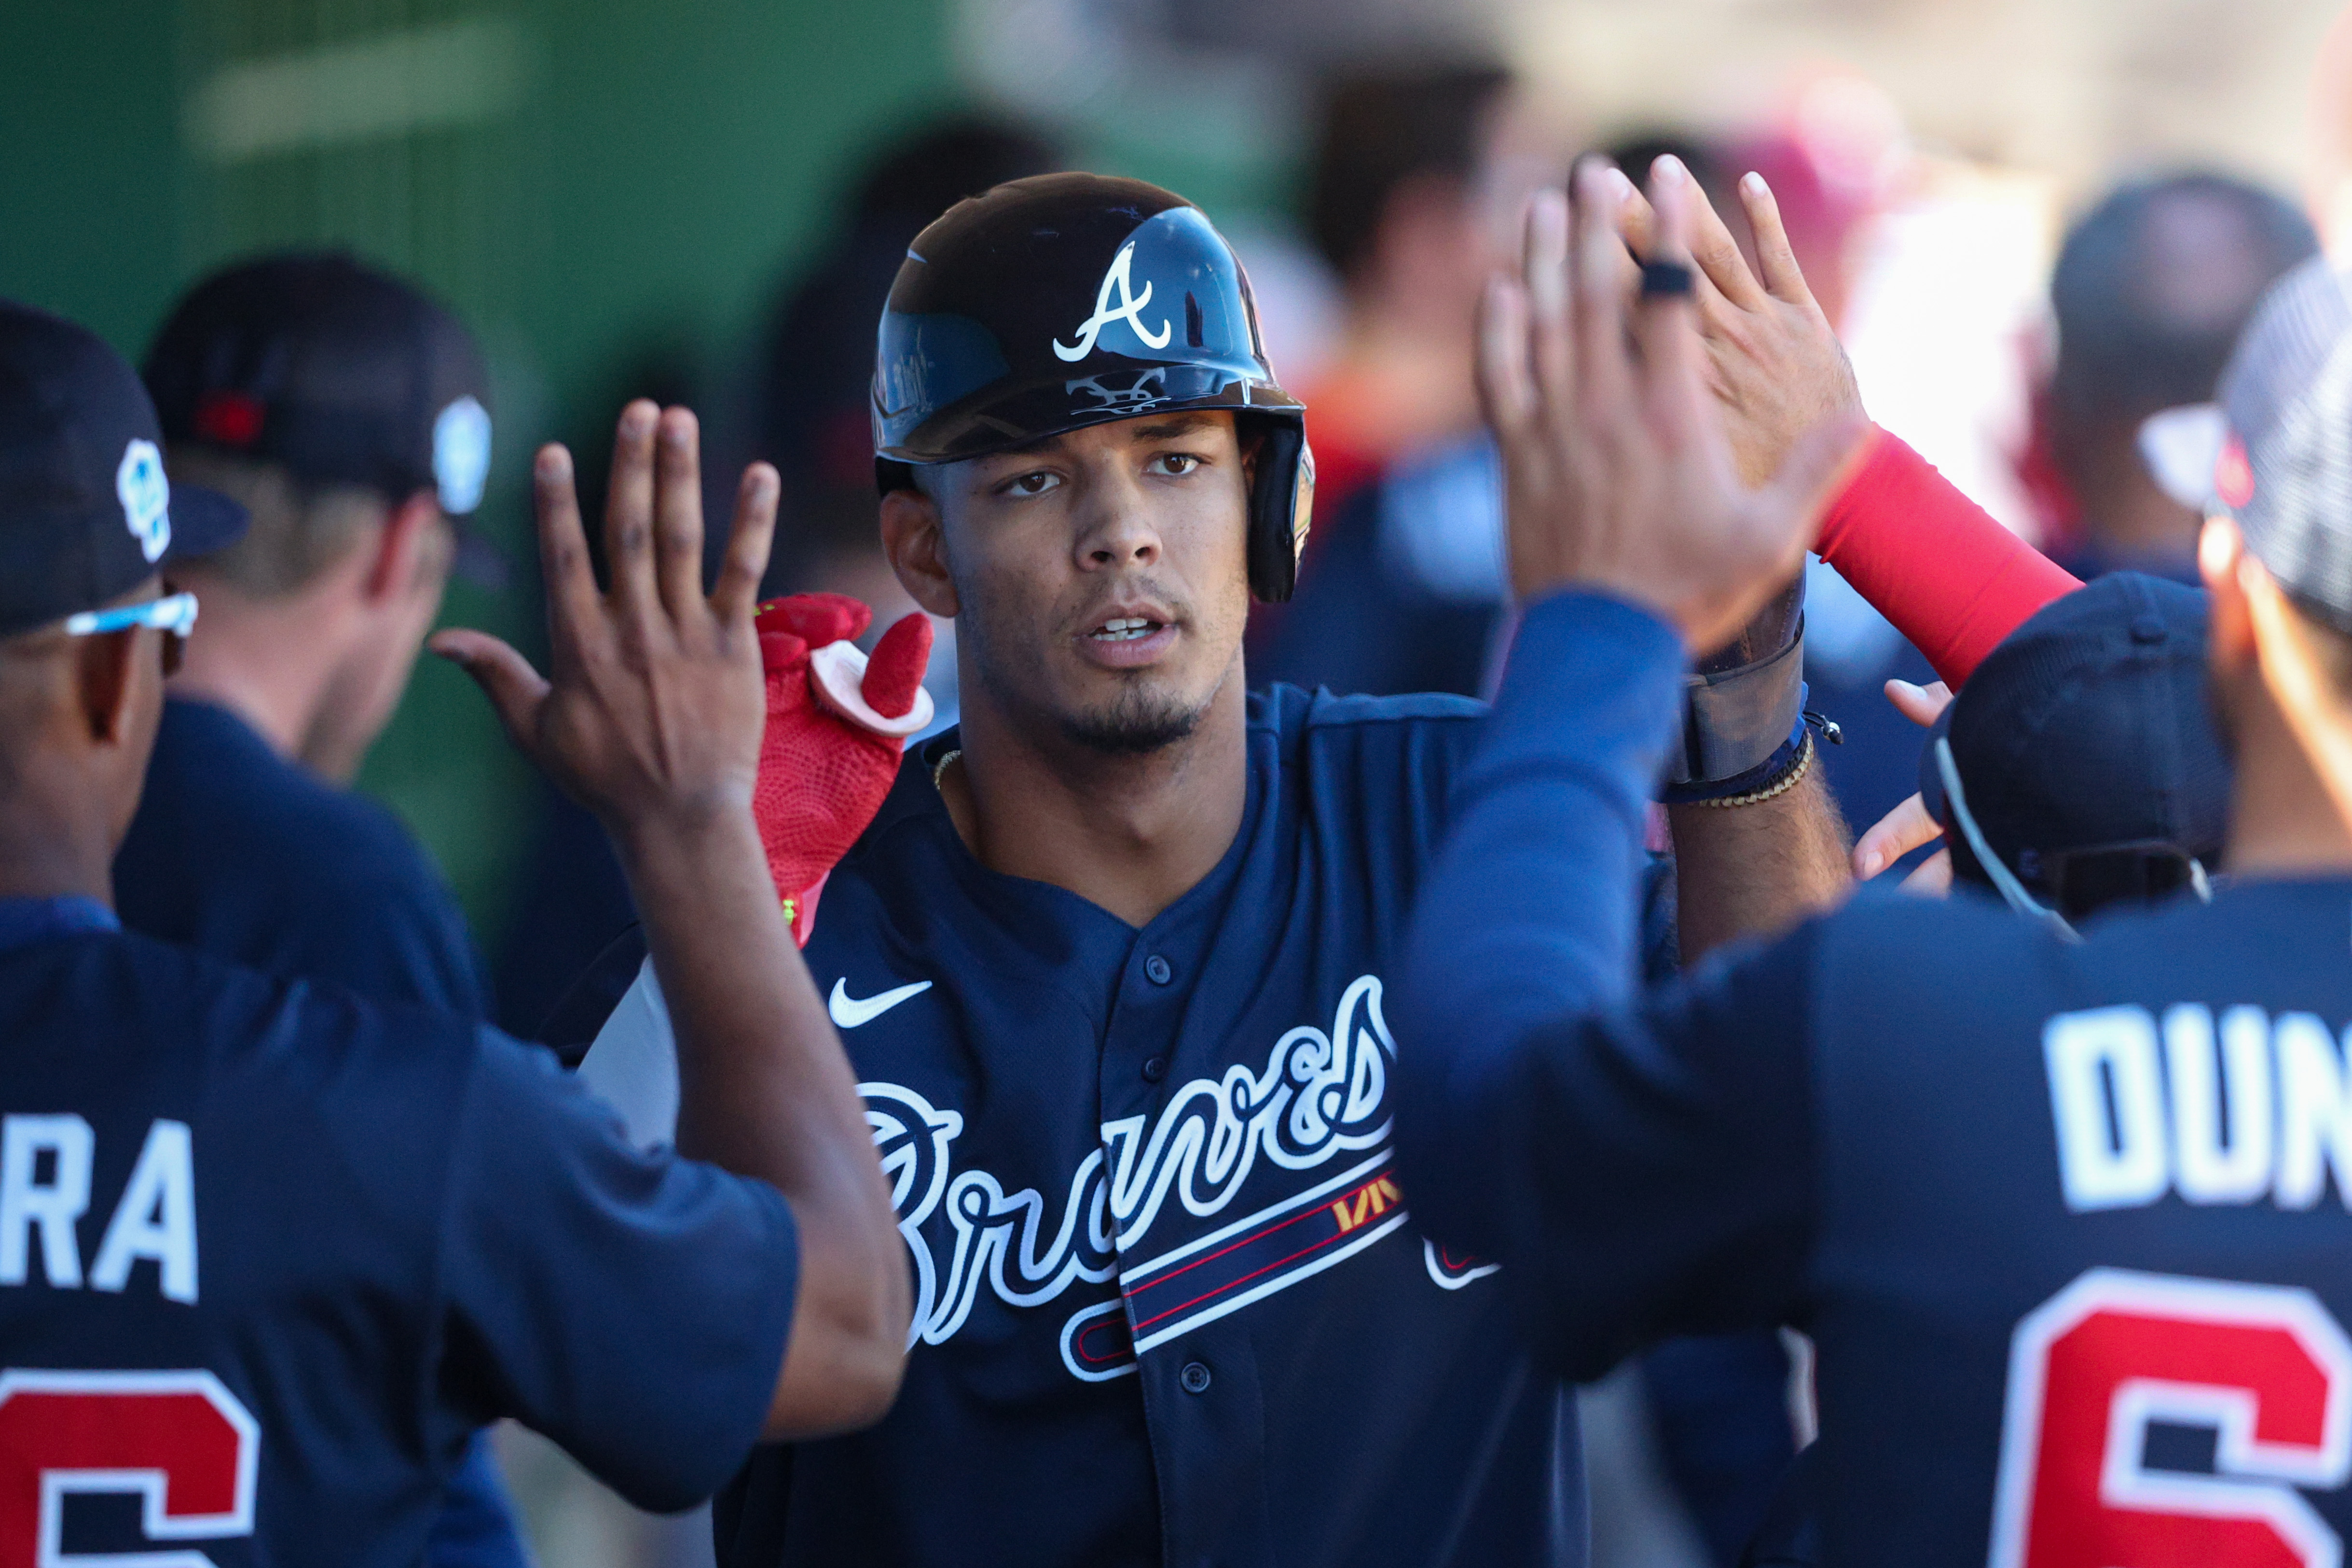 Has Braves infielder Orlando Arcia become the villain ahead of